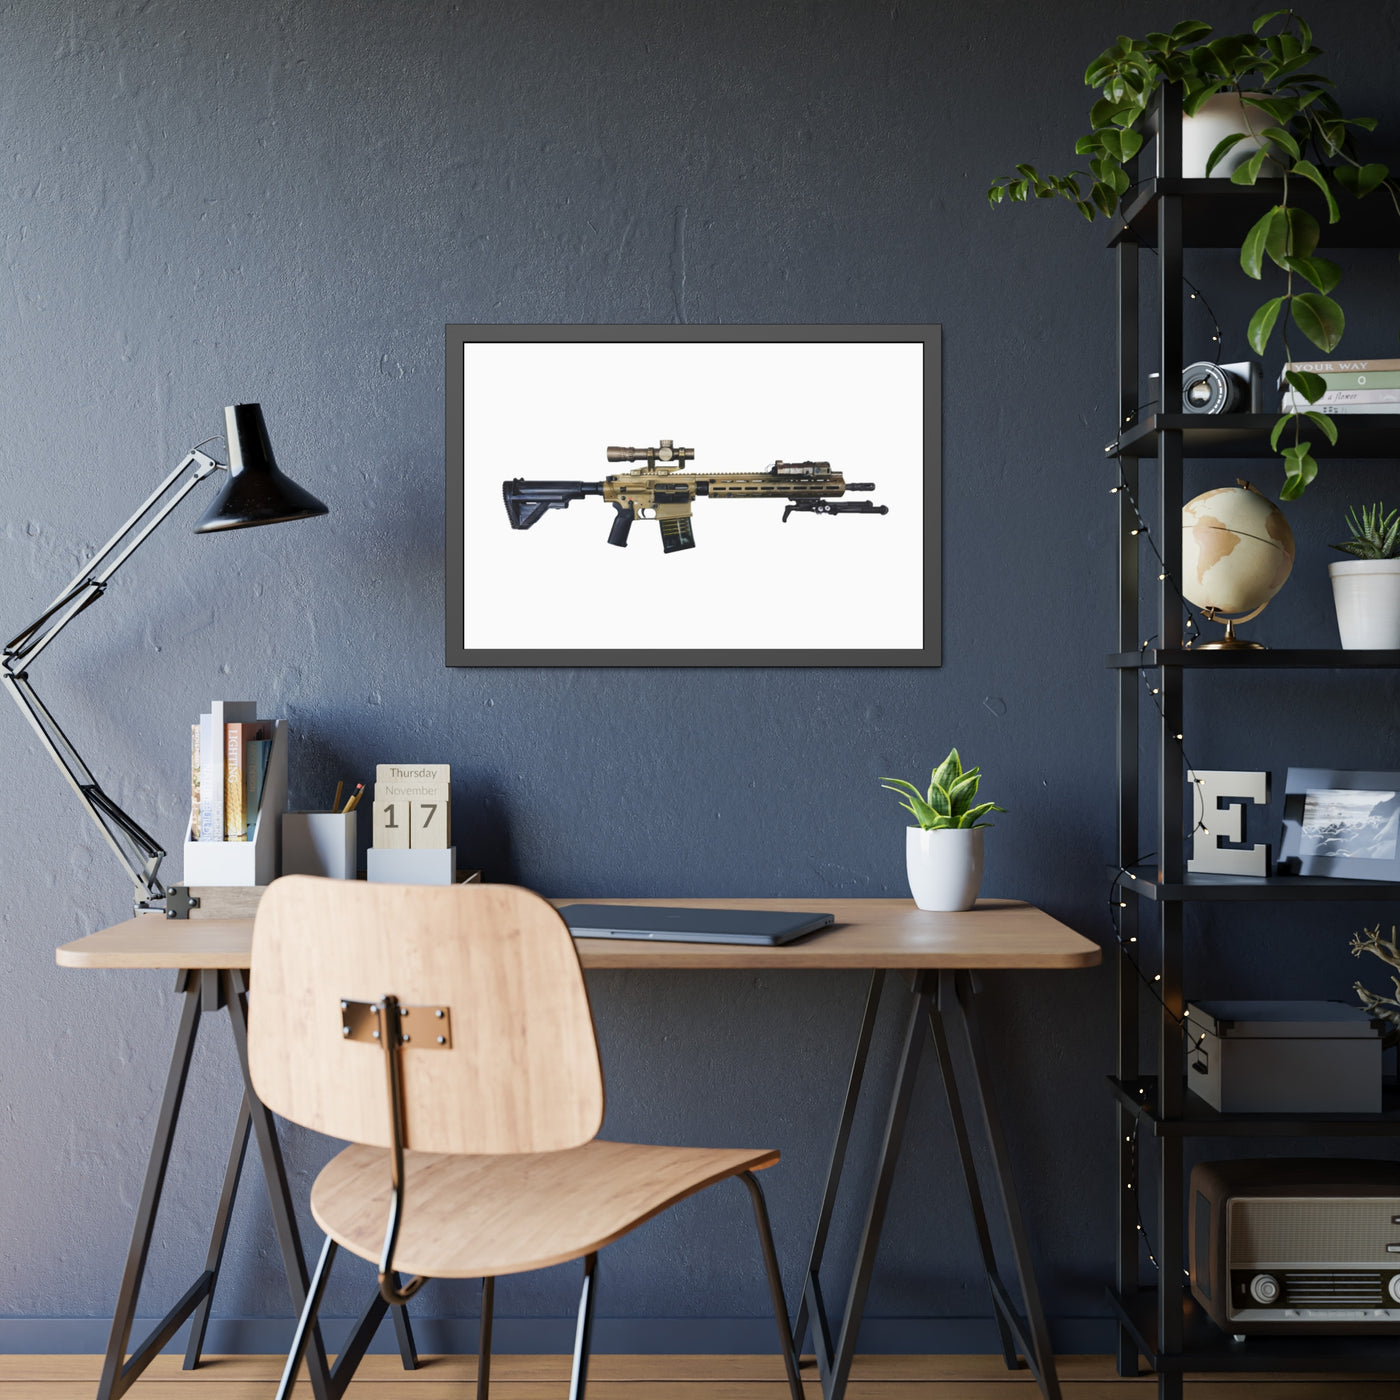 German 7.62x51mm AR10 Battle Rifle Painting - Just The Piece - Black Frame - Value Collection